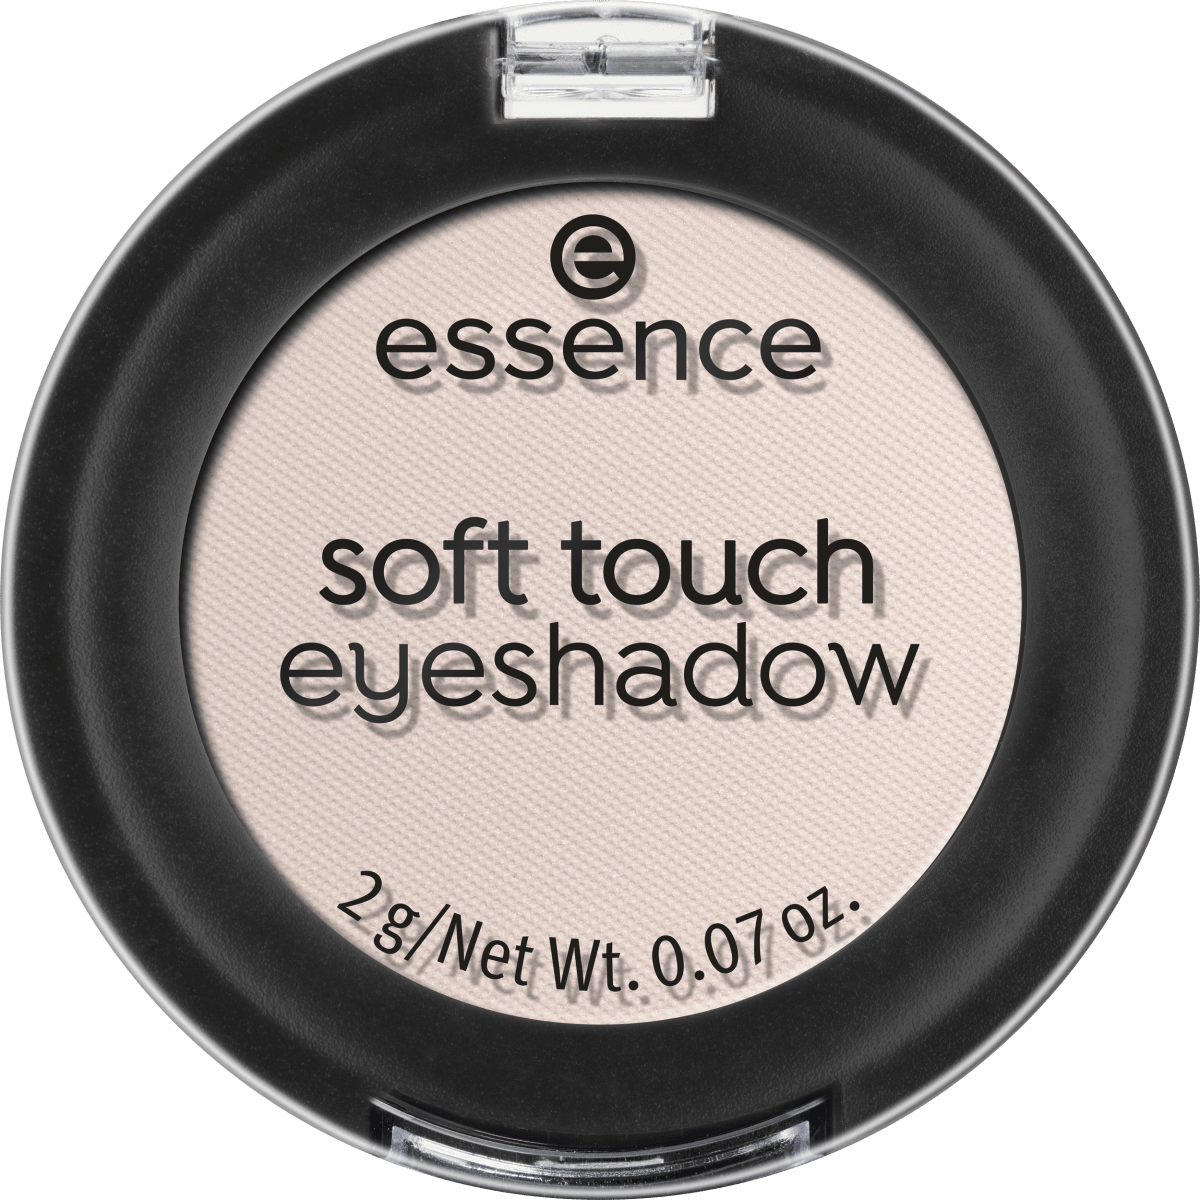 Тени для век Soft Touch 01 The One 2g essence essence тени для век essence soft touch eyeshadow тон 01 the one